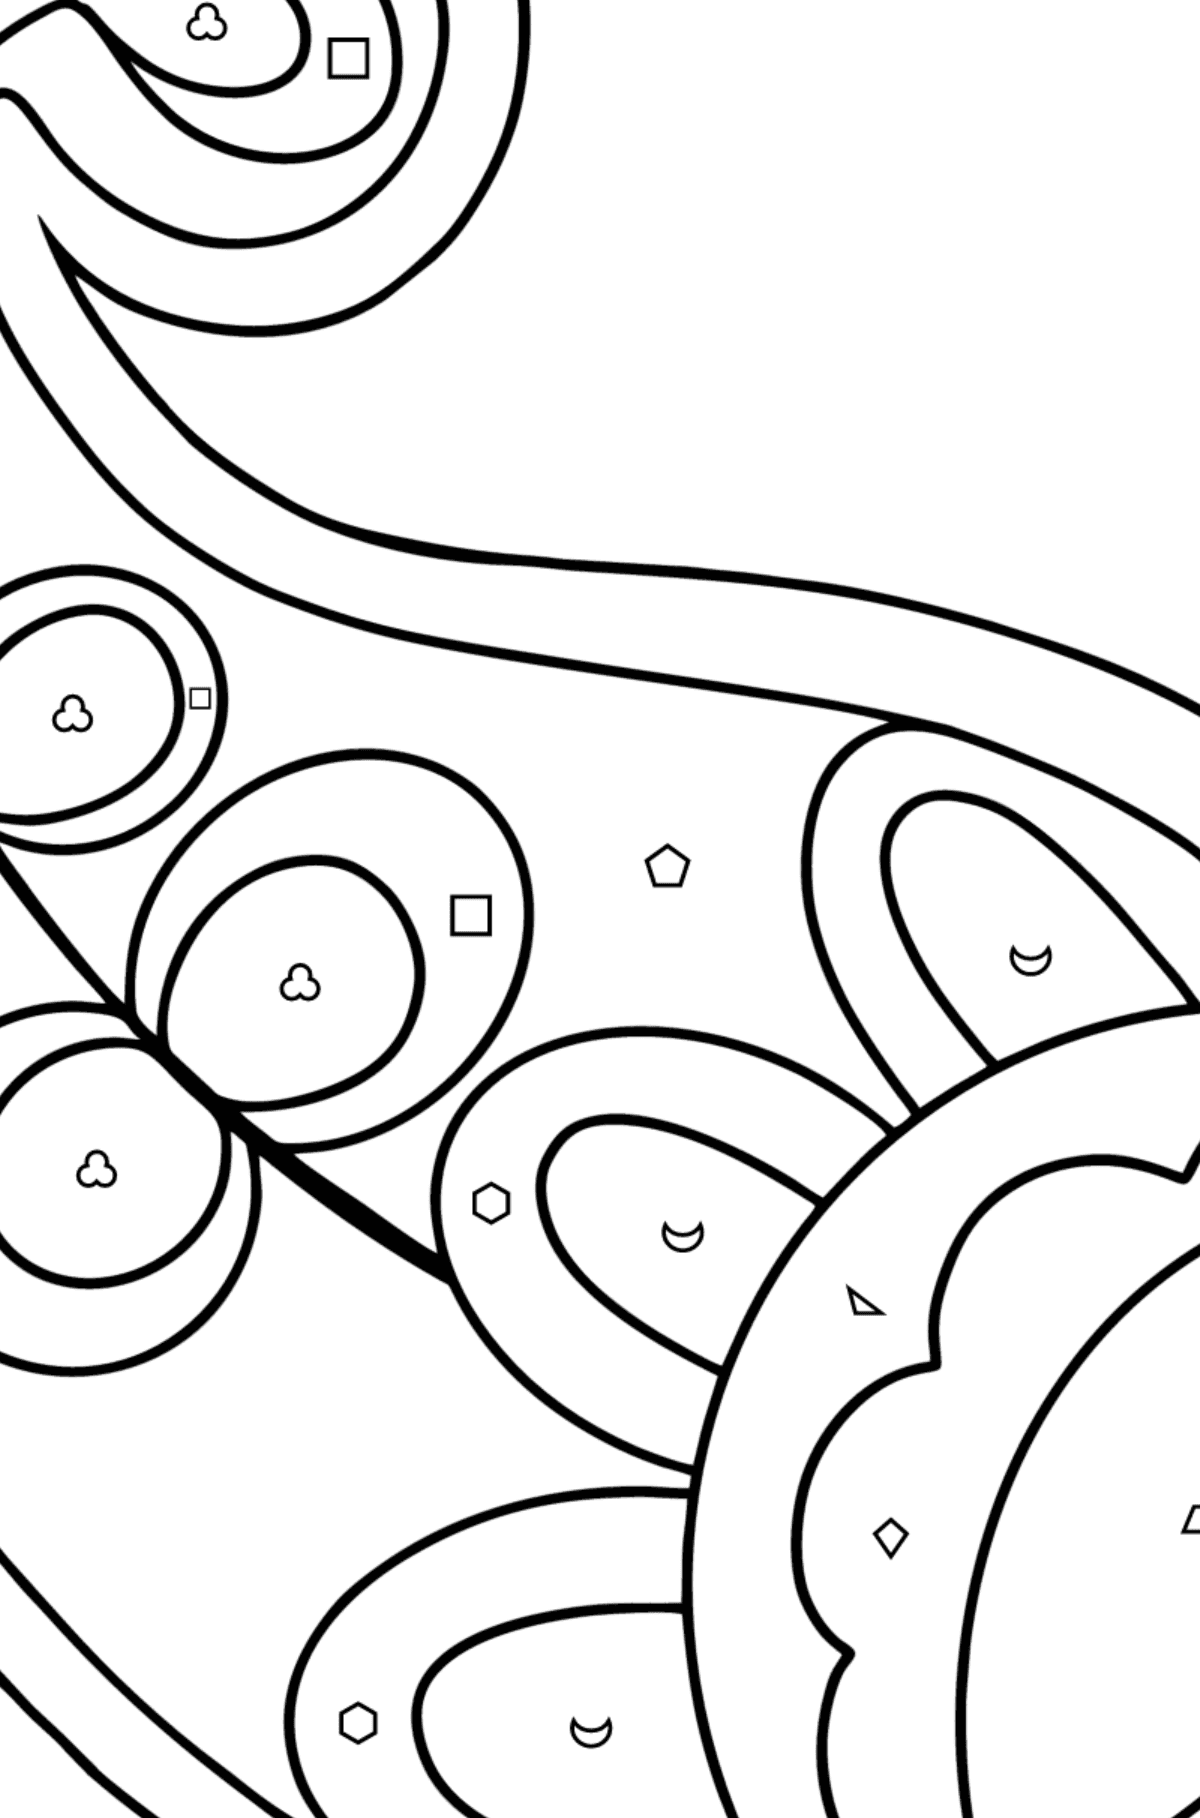 Paisley coloring page for Kids - Coloring by Geometric Shapes for Kids